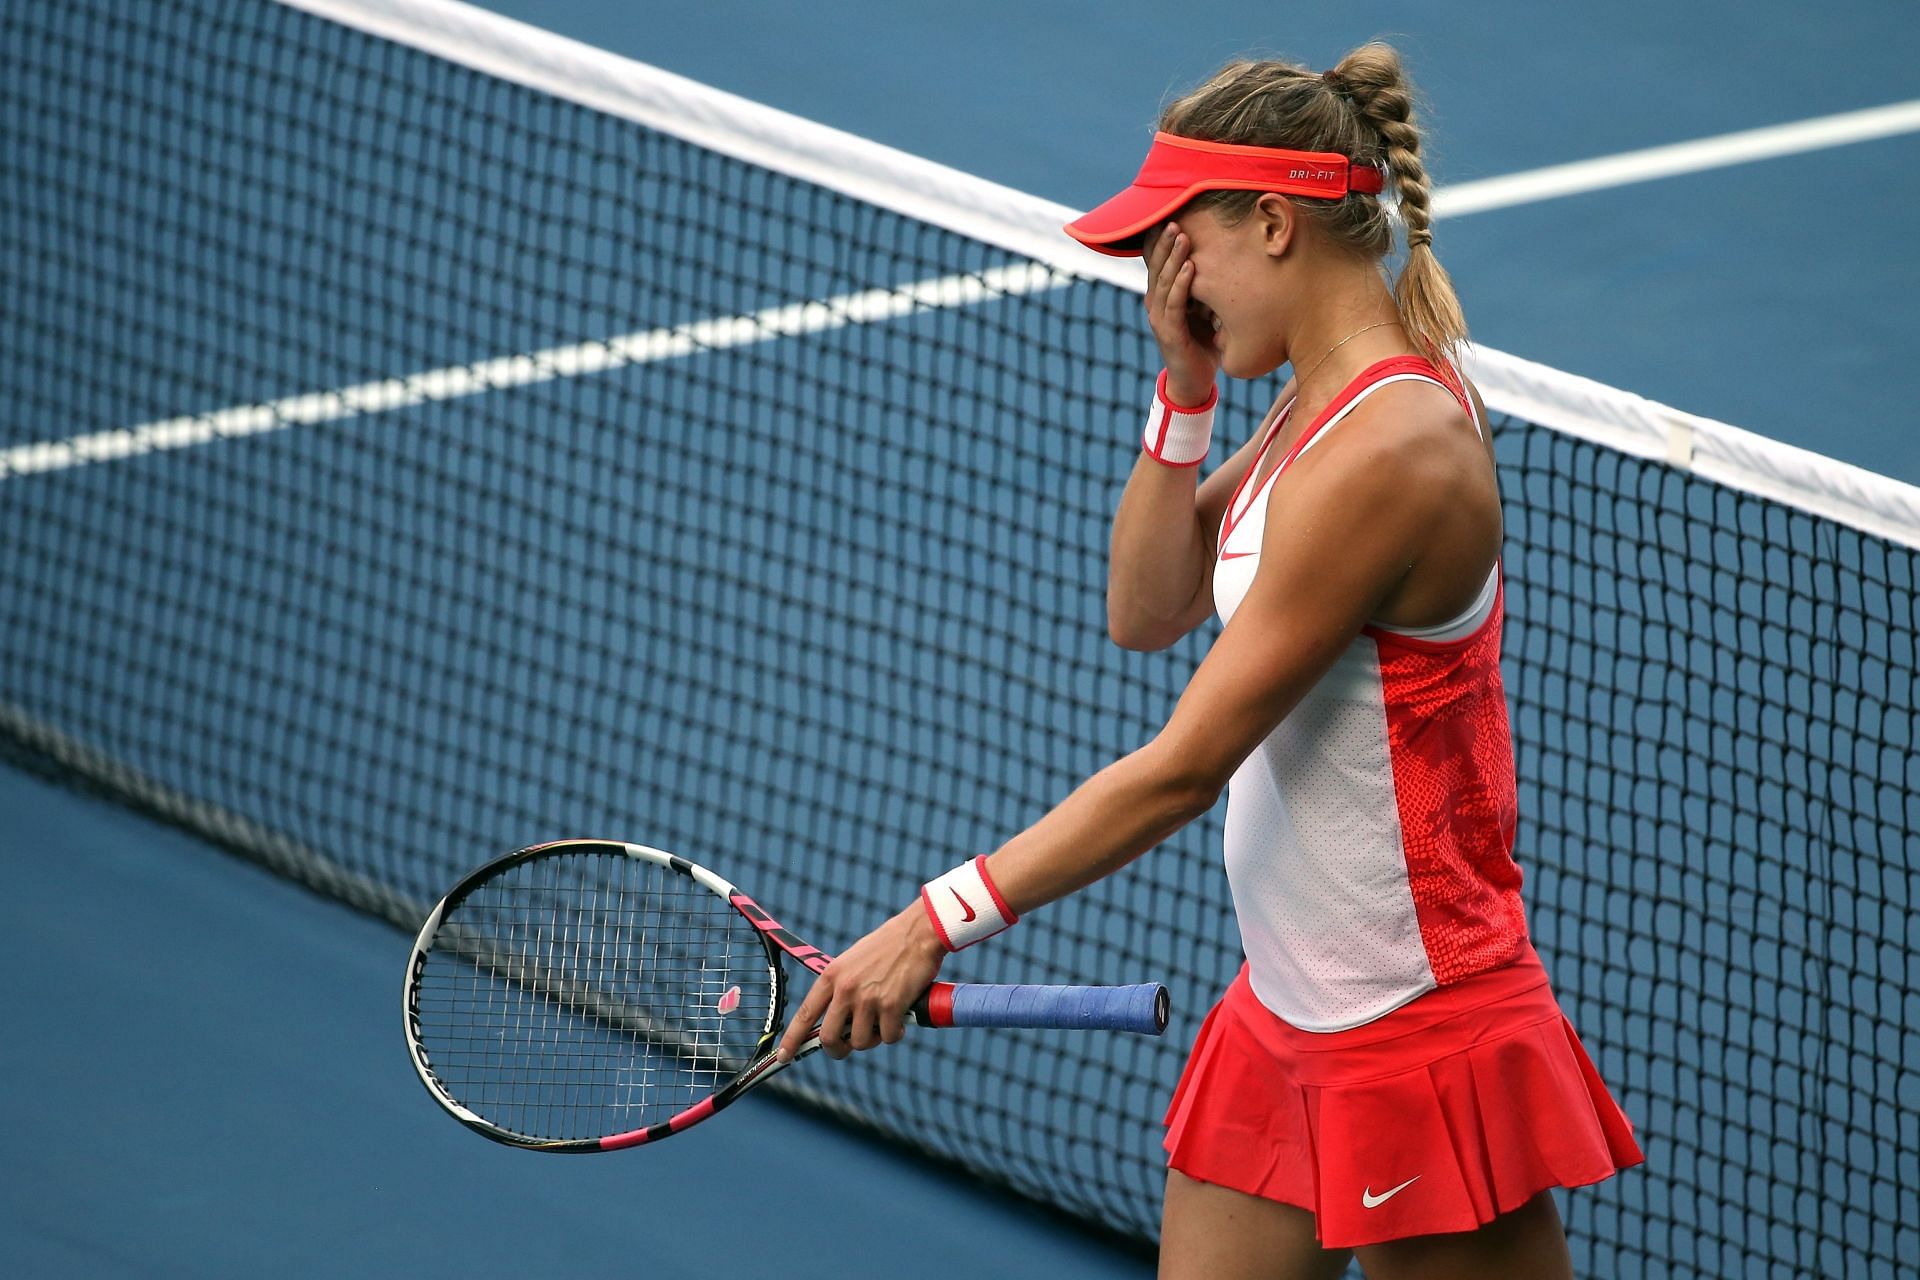 Eugenie Bouchard at the 2015 U.S. Open.